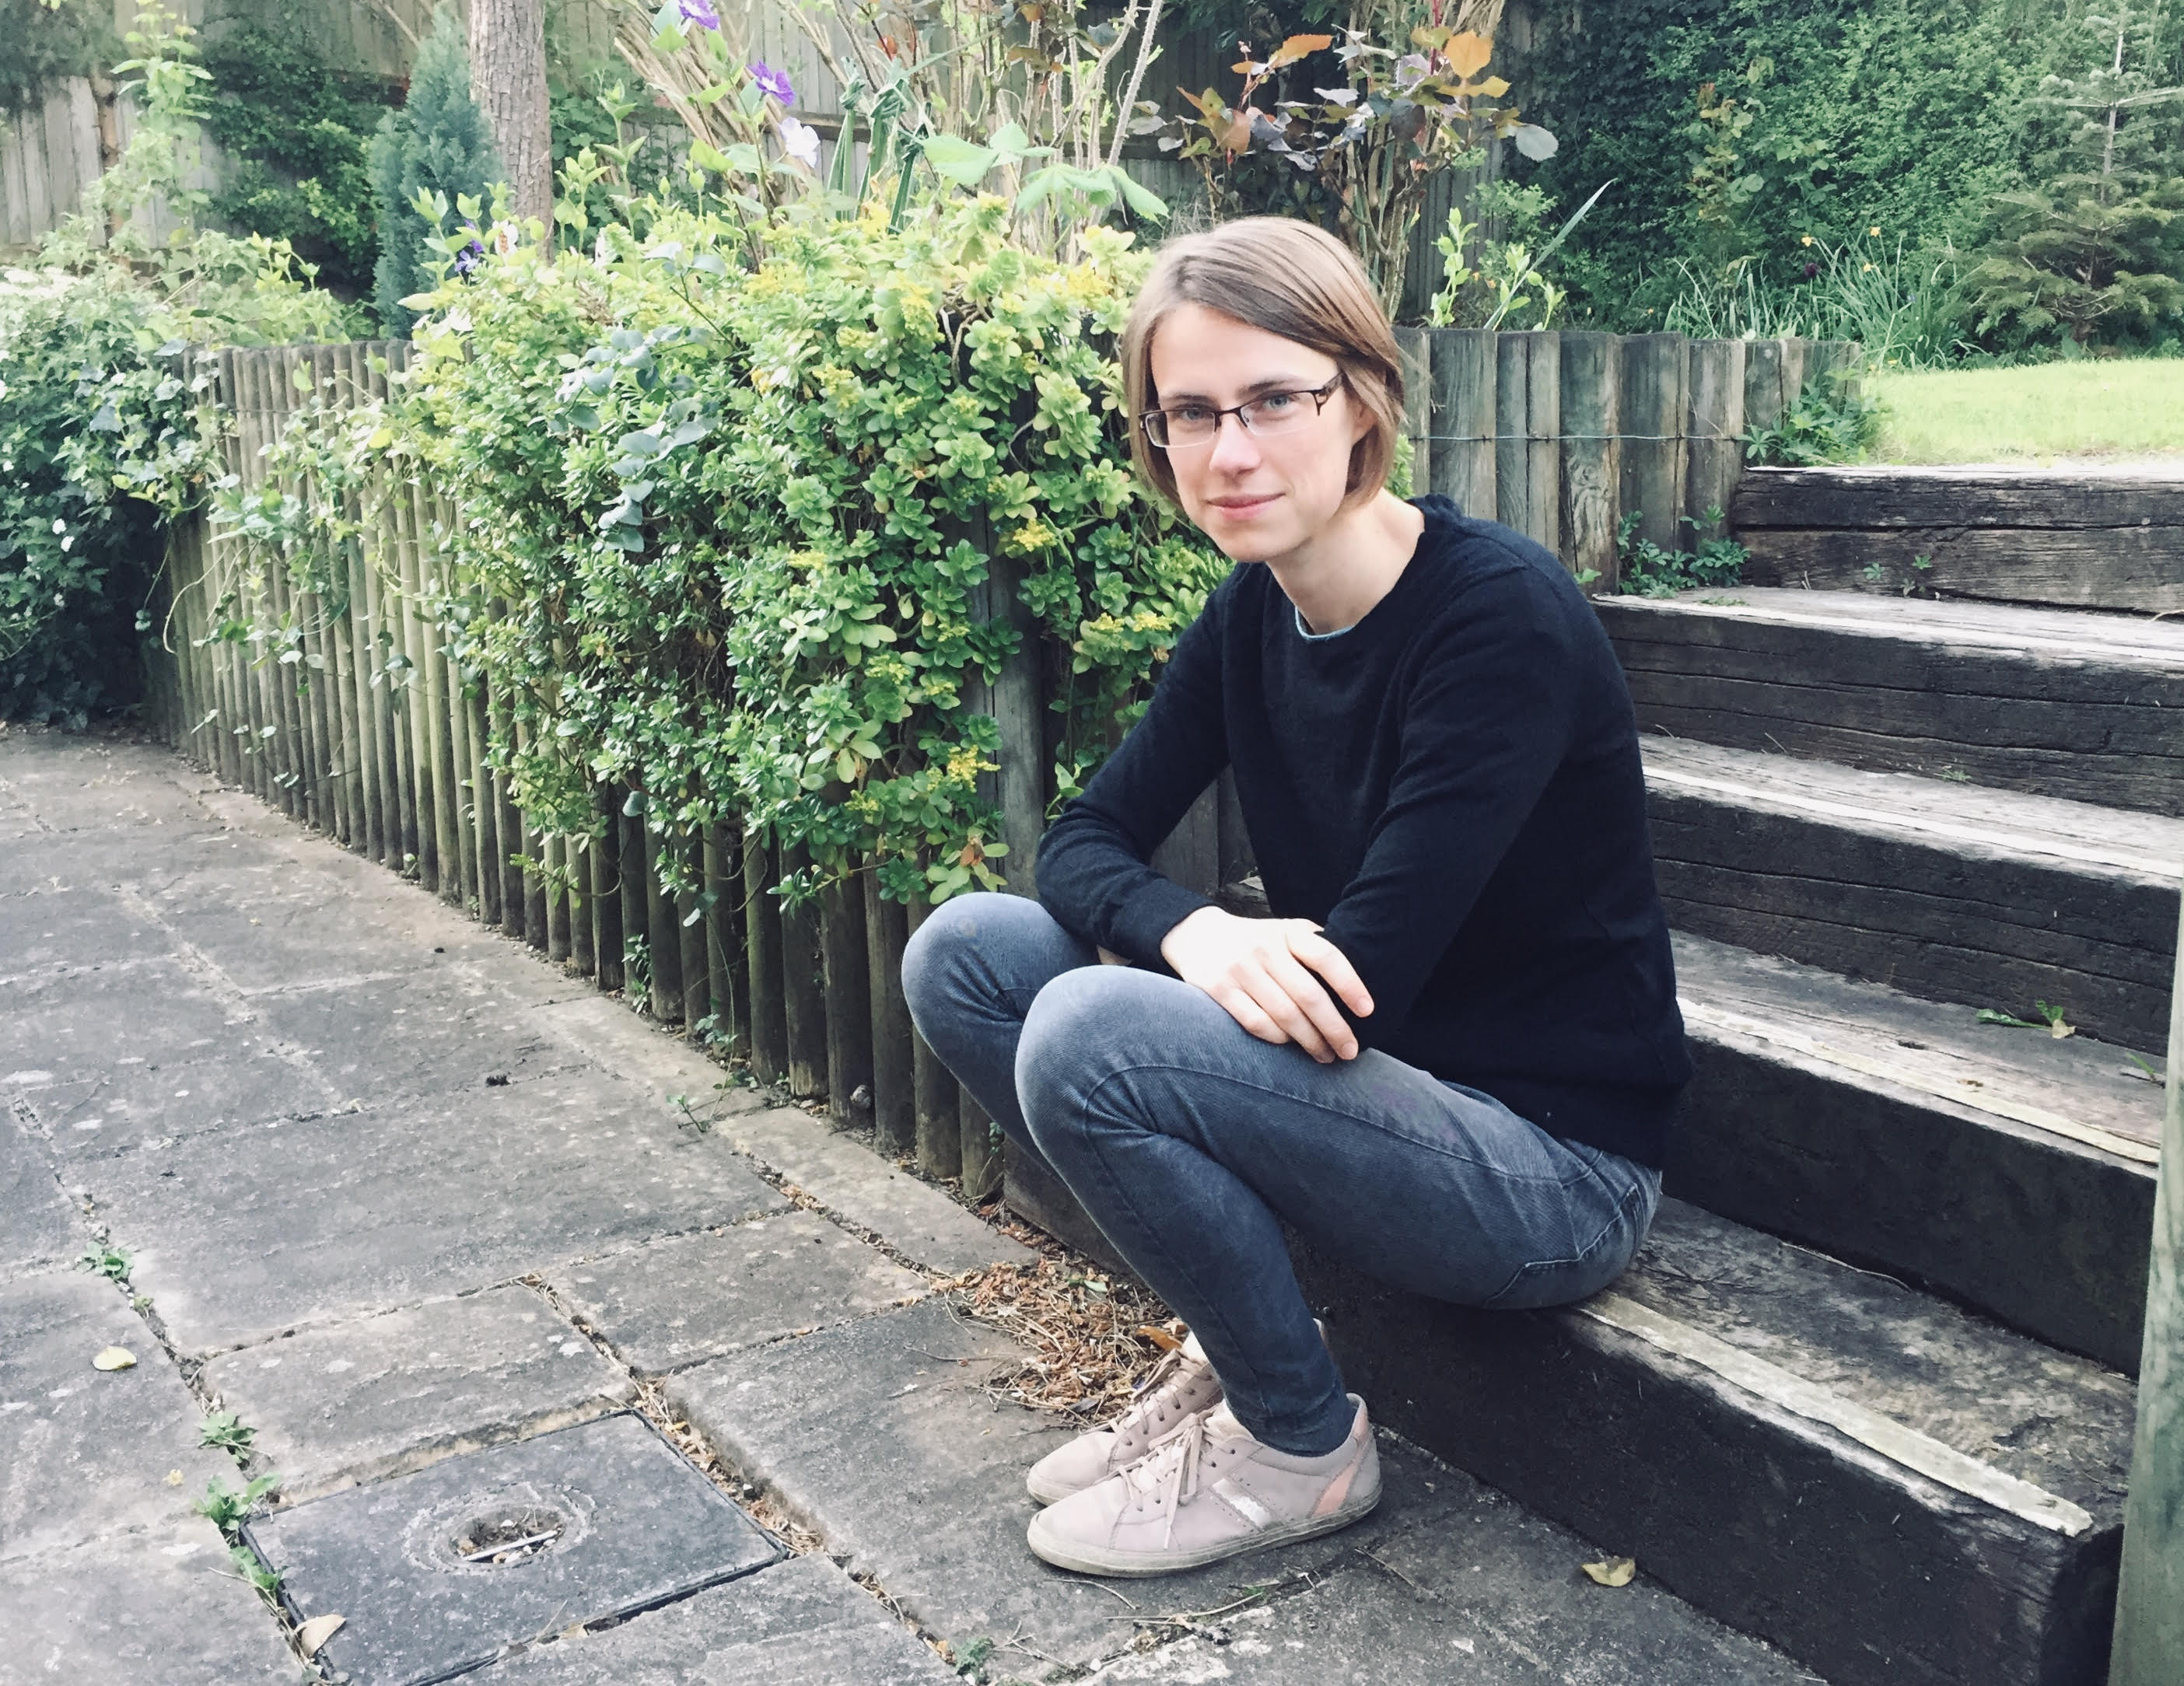 An image of Han Smith, a white person sitting on some steps outside. She smiles, with crossed arms resting on her lap. She wears a black long sleeved top and dark blue jeans. She has short brown hair and glasses.